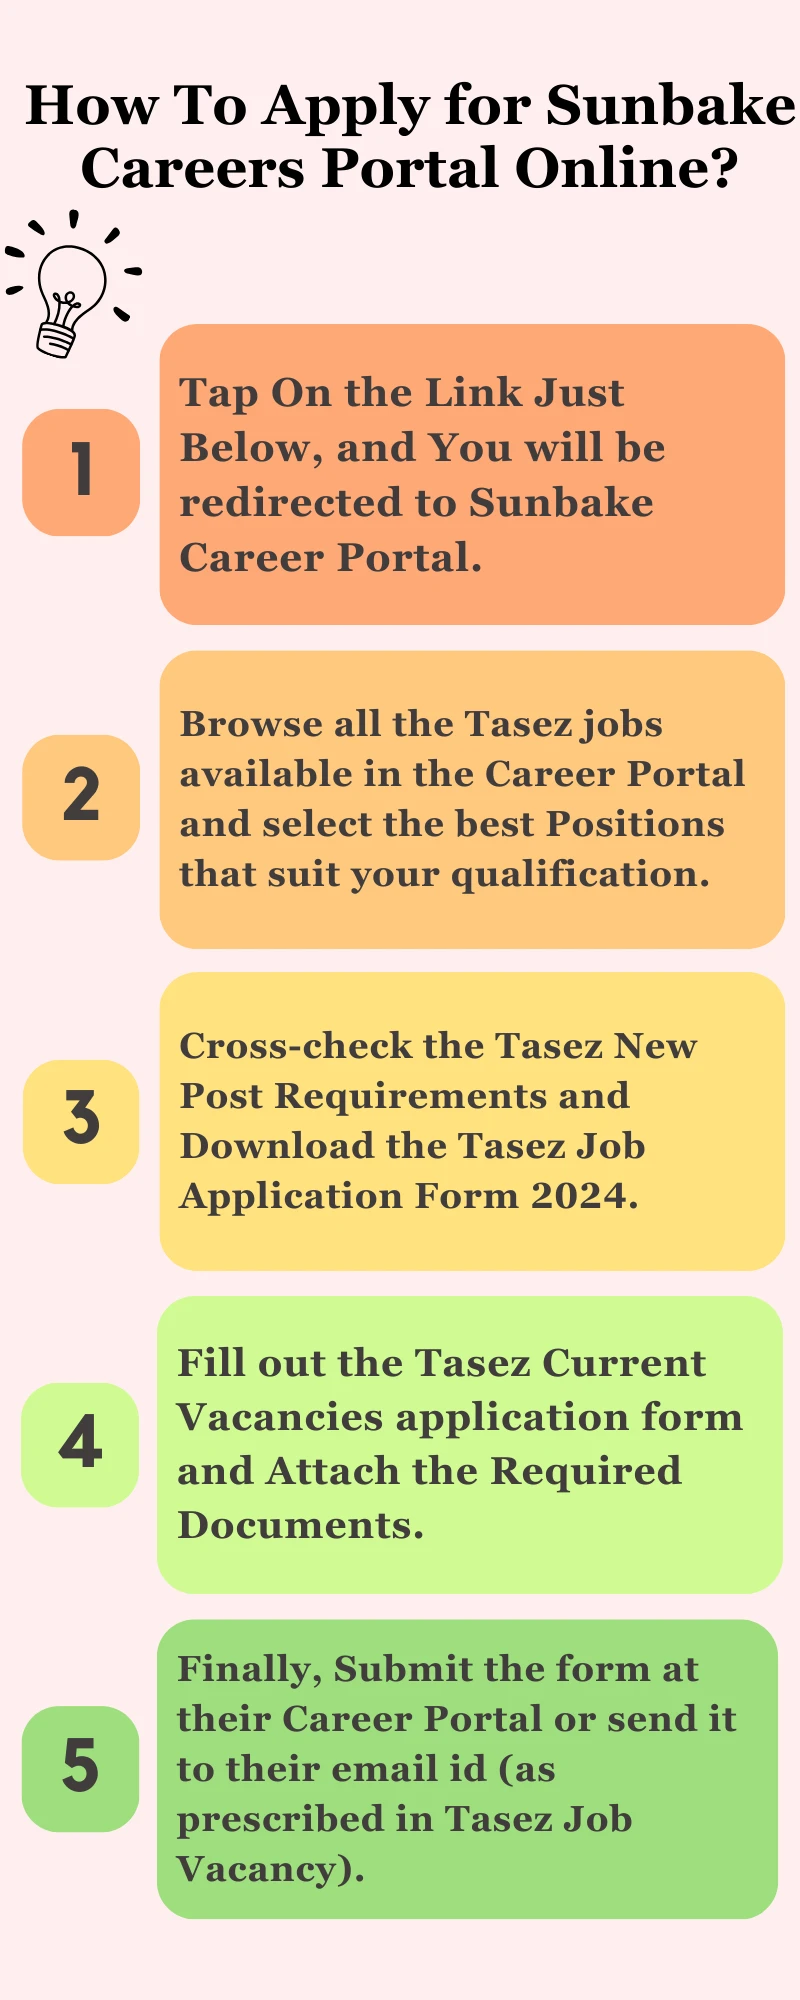 How To Apply for Sunbake Careers Portal Online?